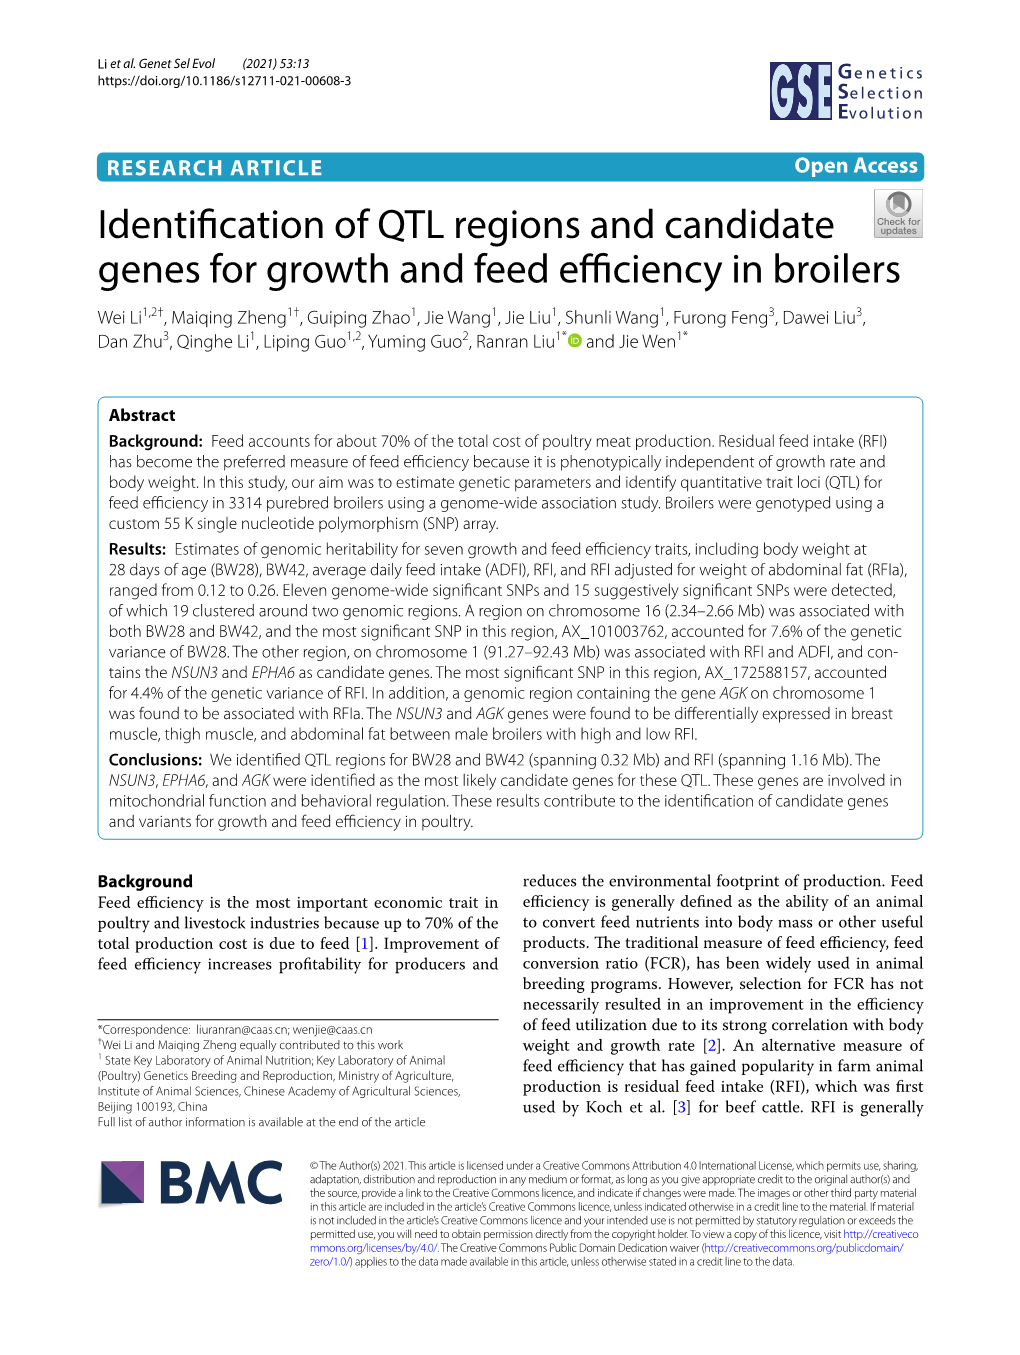 Identification of QTL Regions and Candidate Genes for Growth And